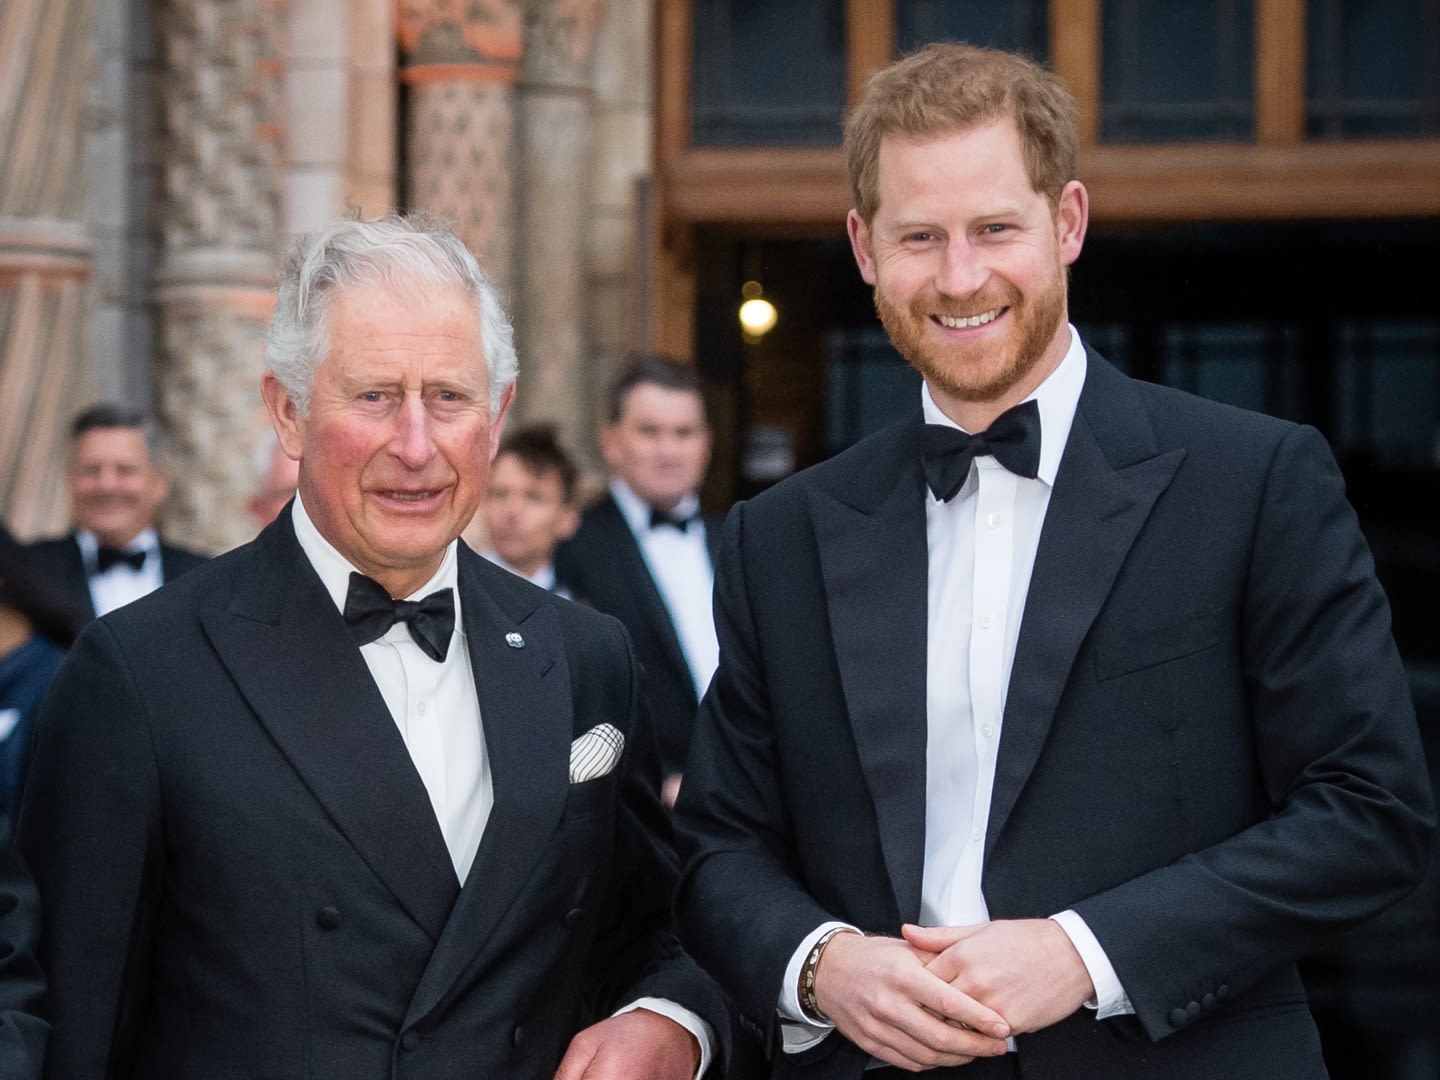 King Charles III Declined Prince Harry’s Invite & Ended Up Hanging out With One of Harry’s Ex-Friends Instead